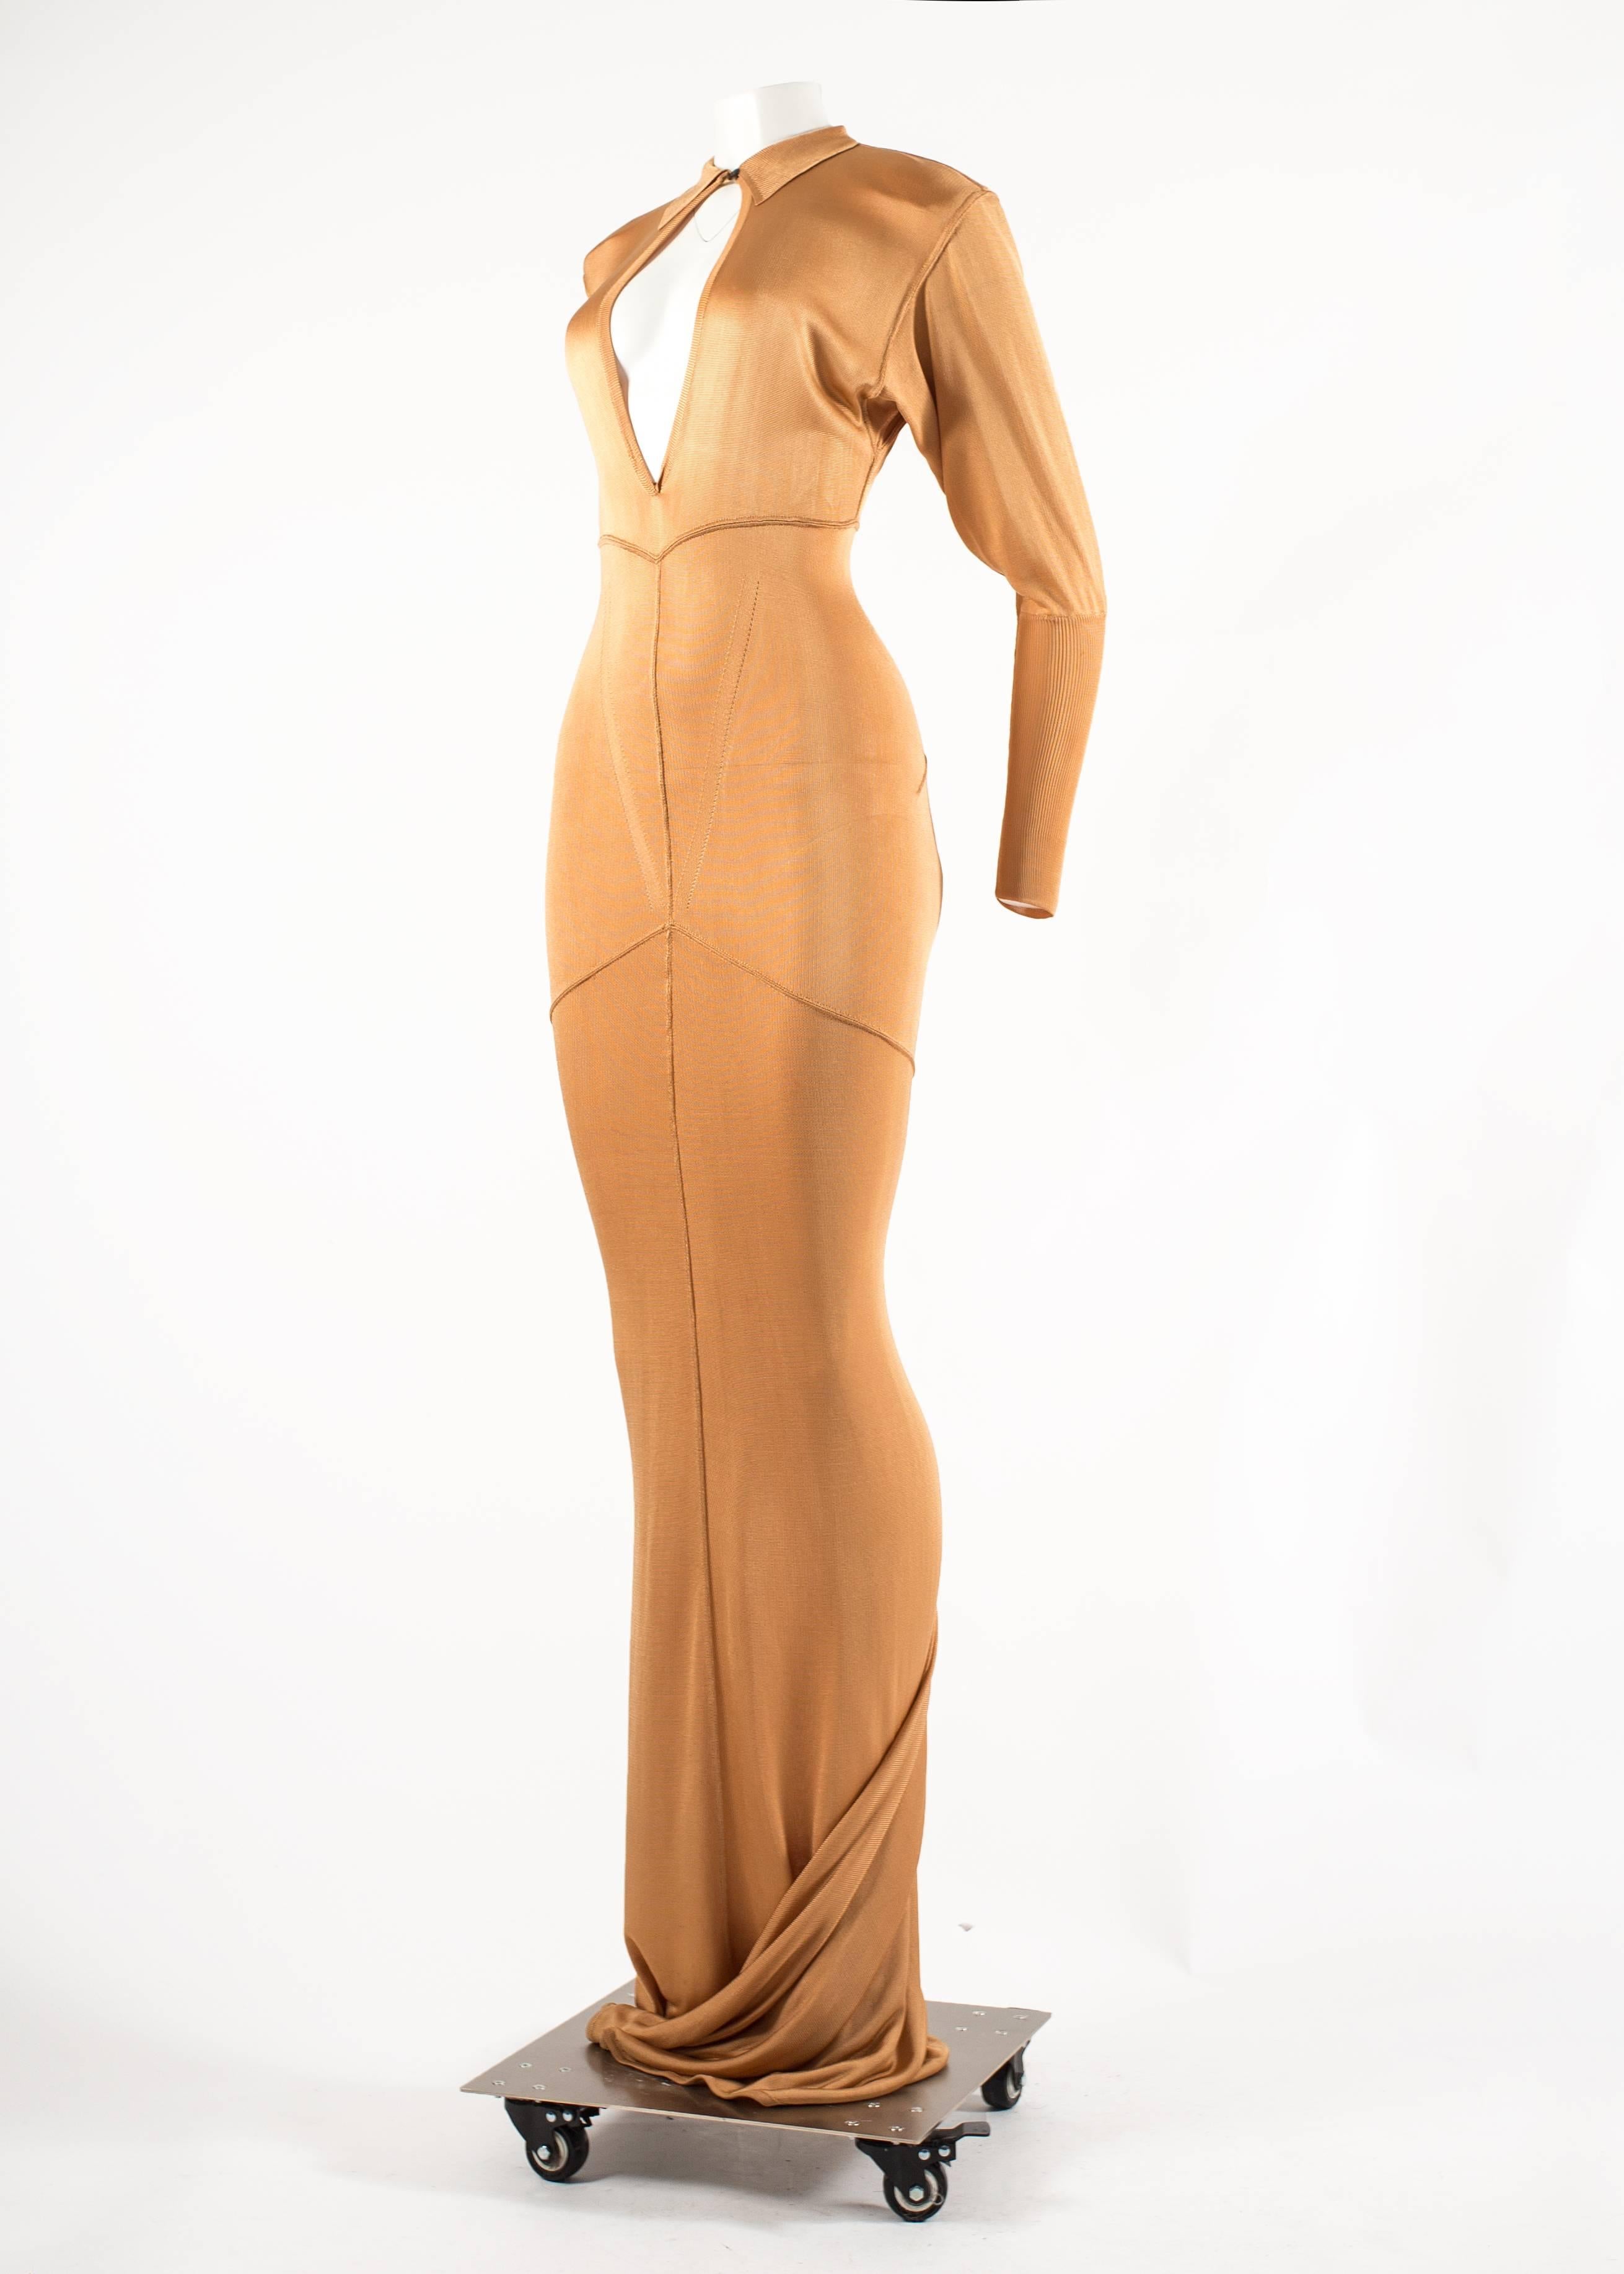 Azzedine Alaia Autumn-Winter 1986 apricot acetate knit evening gown with train
